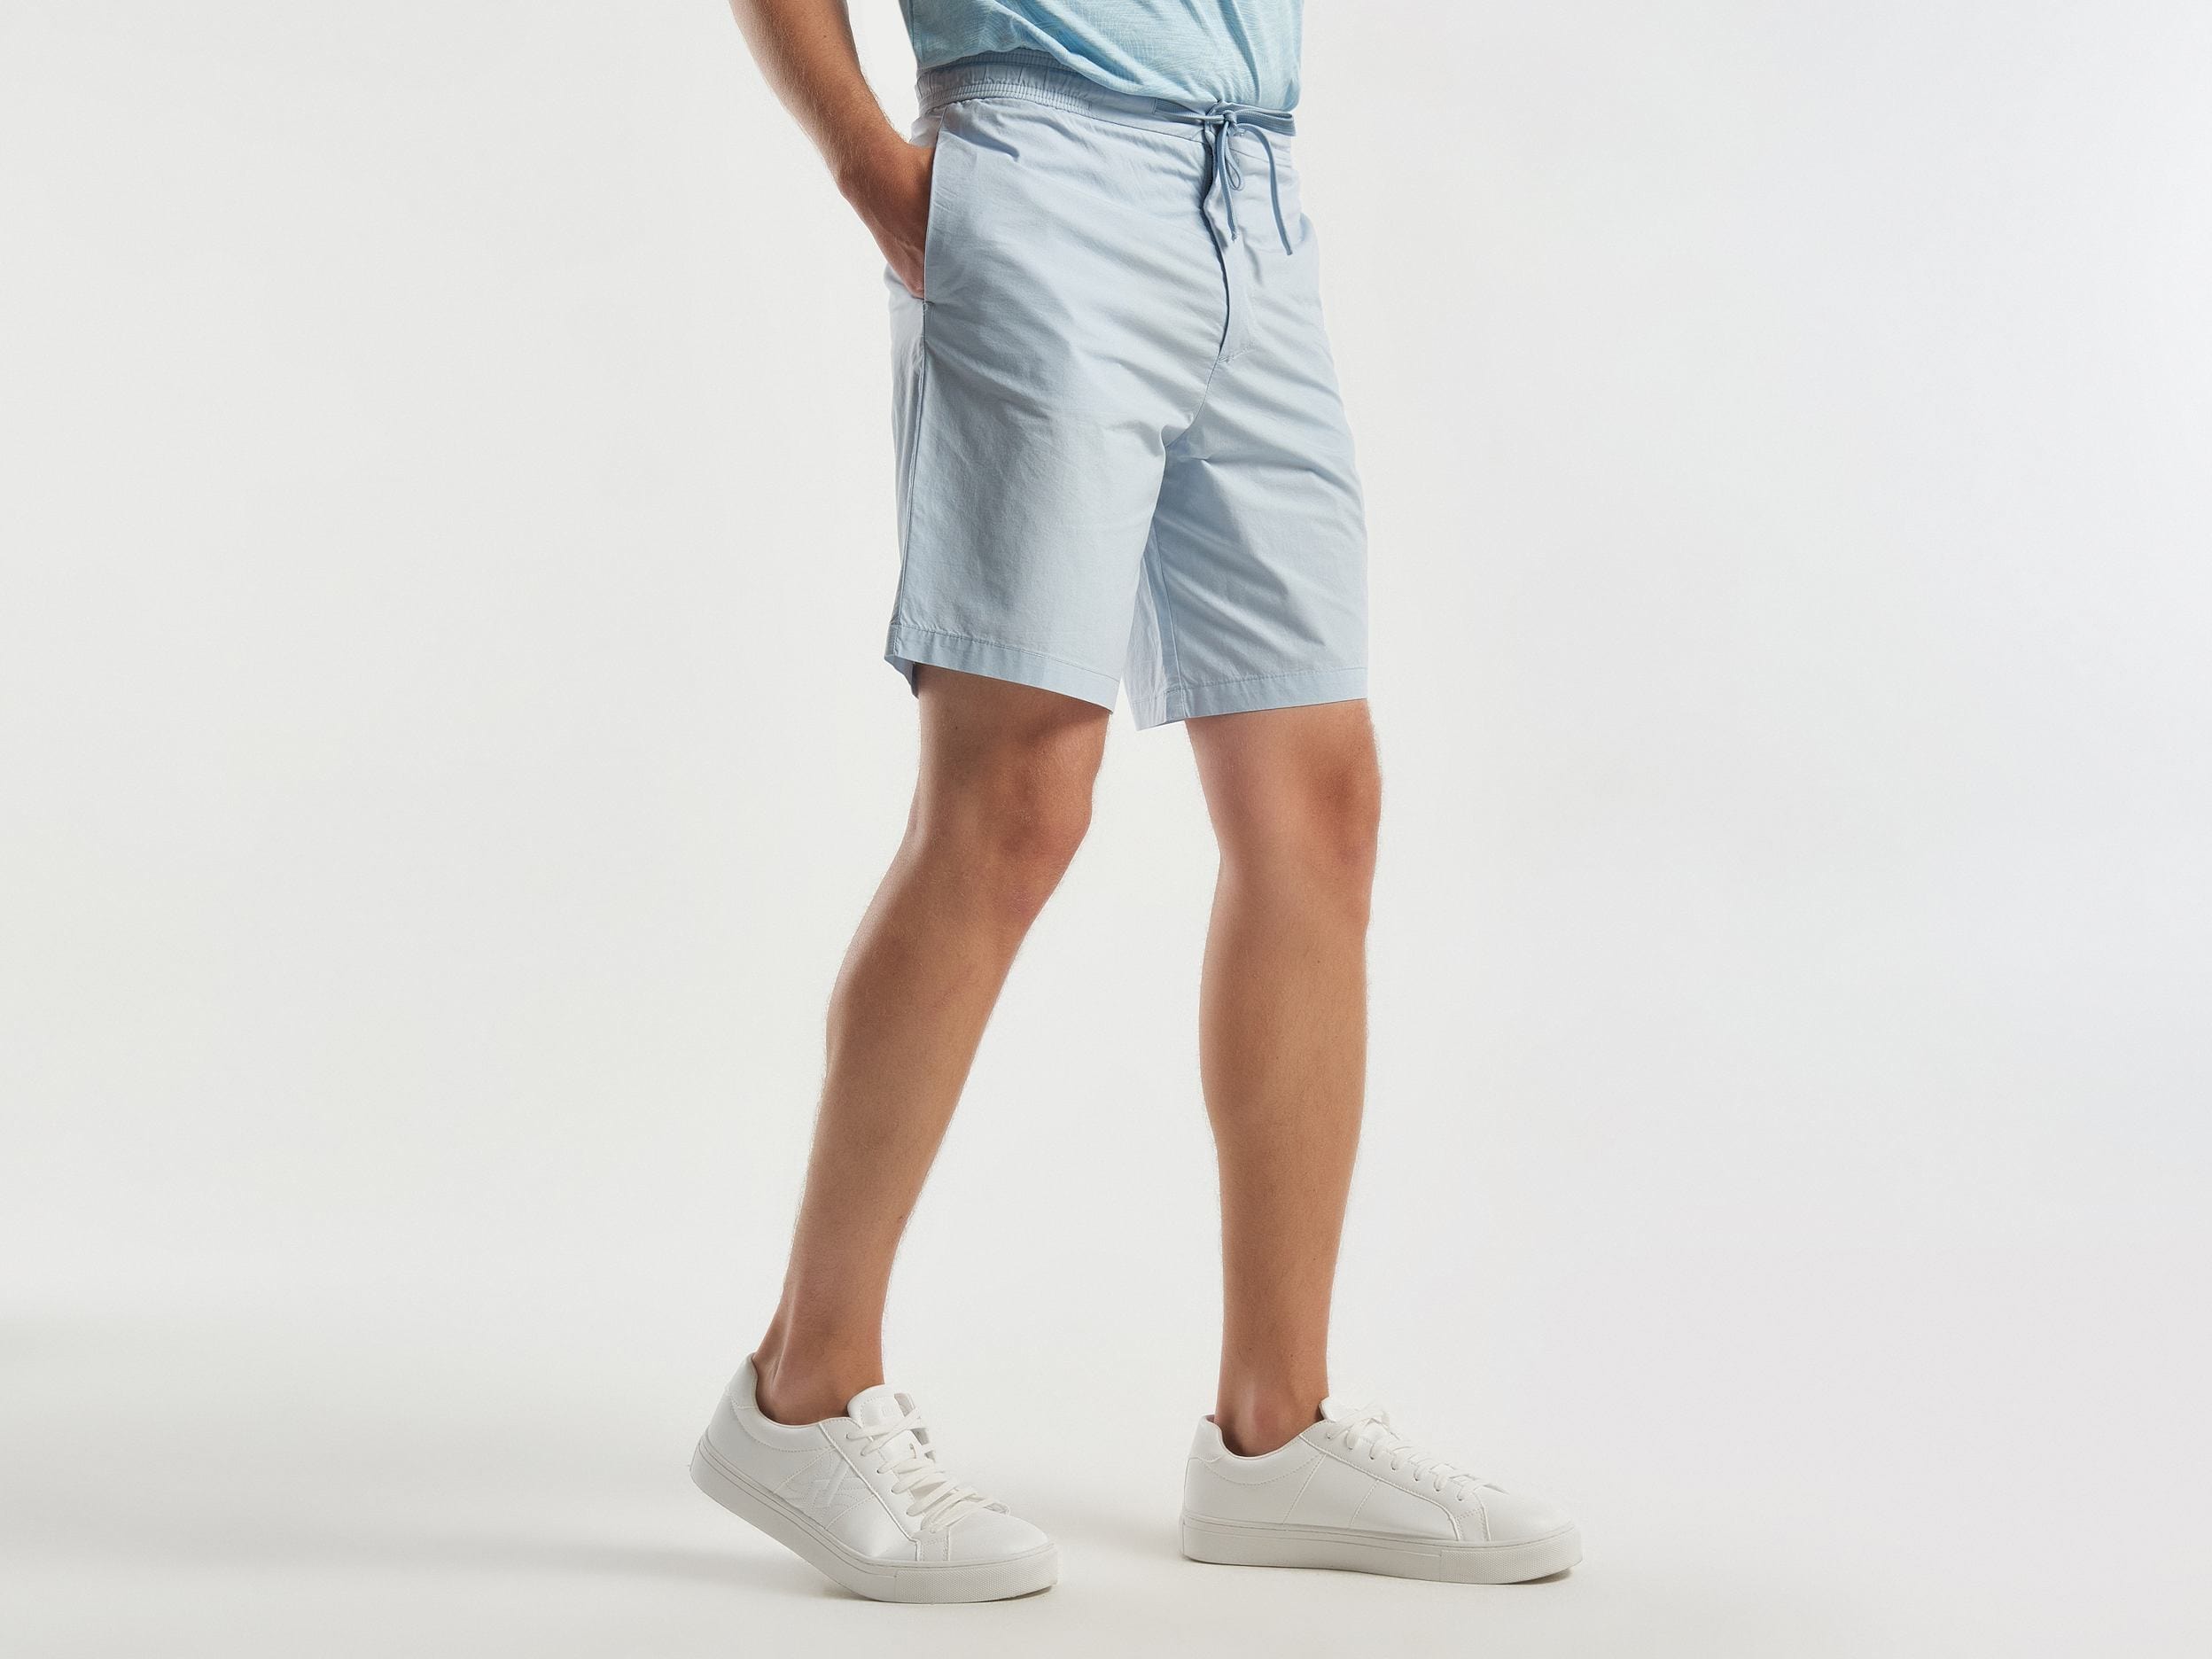 Shorts in canvas with drawstring